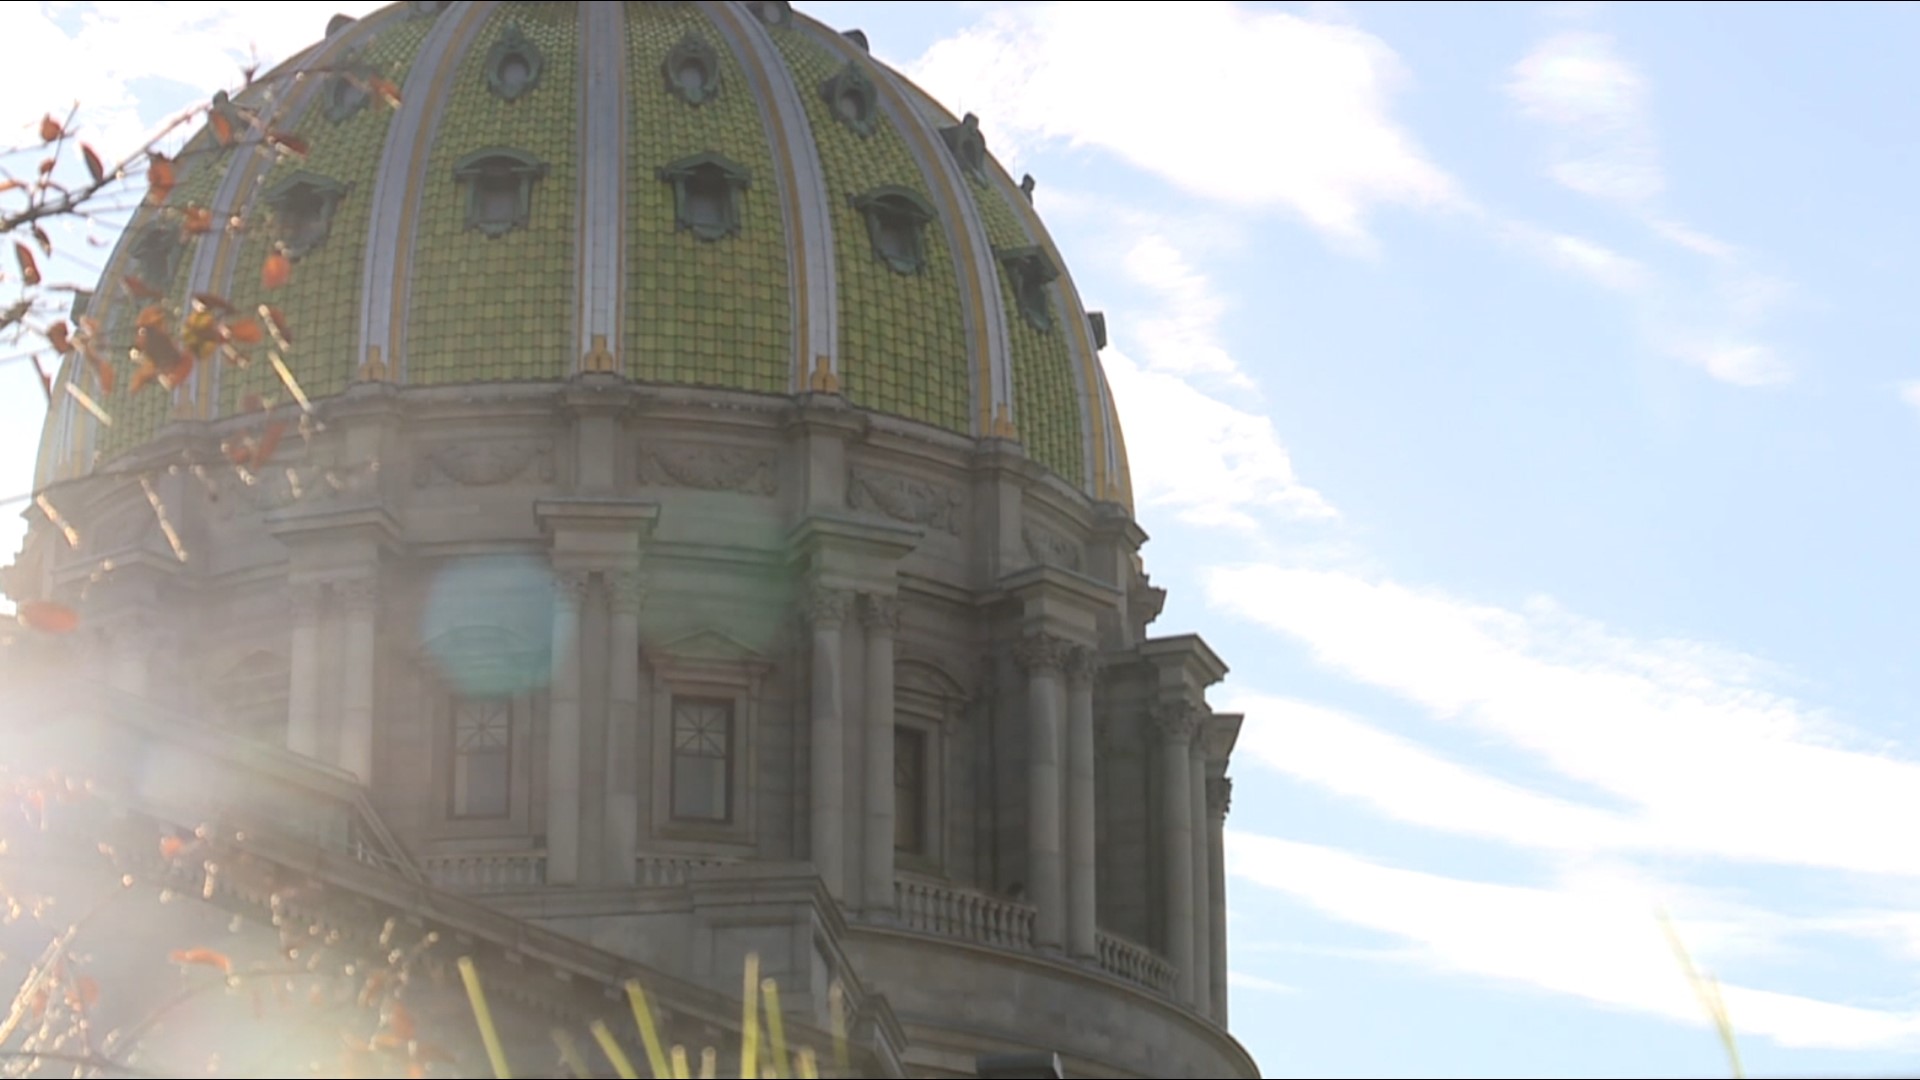 Pennsylvania’s gubernatorial race is heating up in light of a leaked draft of the Supreme Court’s majority opinion on overturning Roe v. Wade.